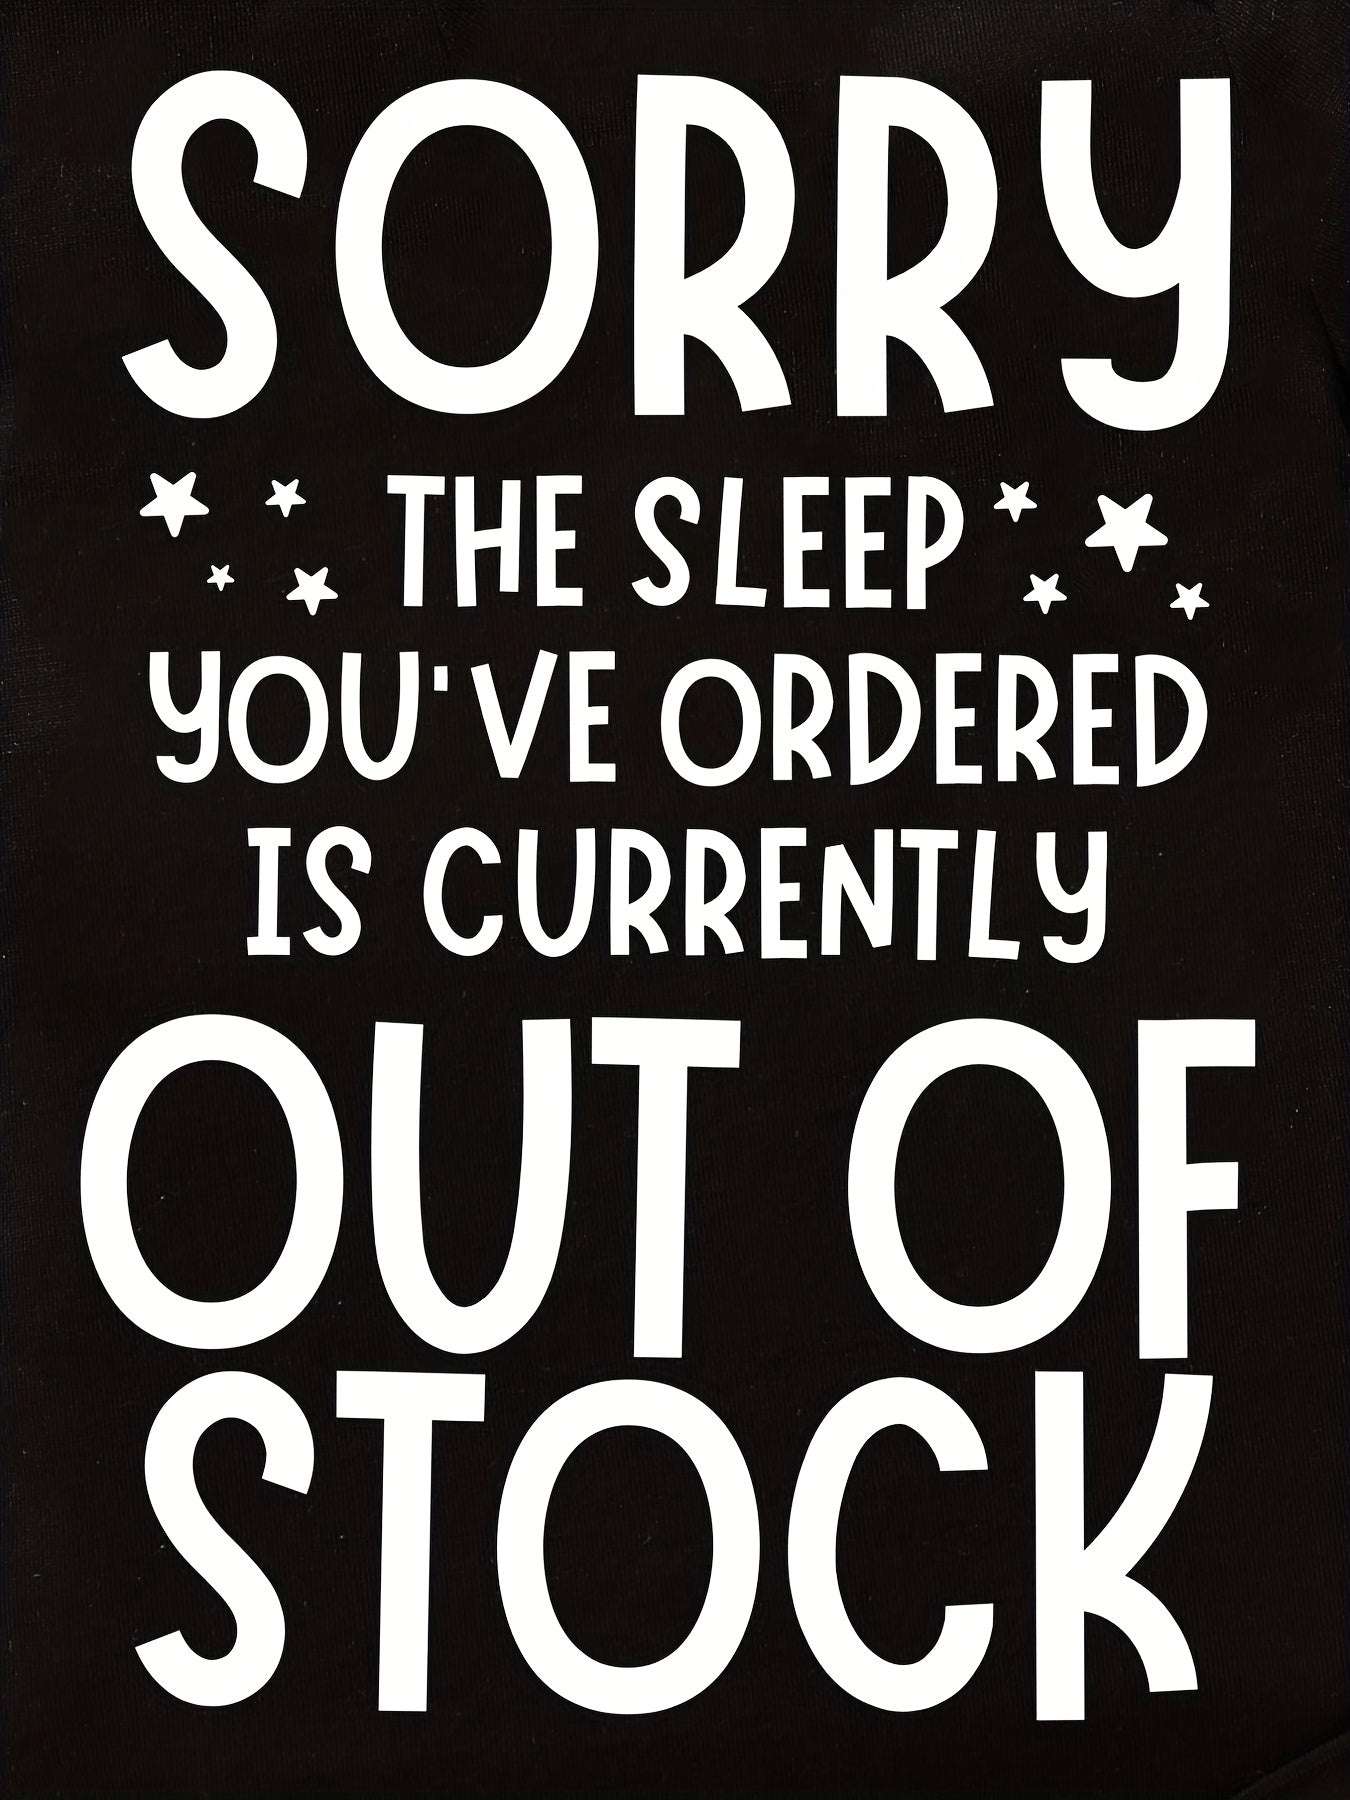 Sorry The Sleep You've Ordered Is Currently Out Of Stock Christian Baby Onesie claimedbygoddesigns